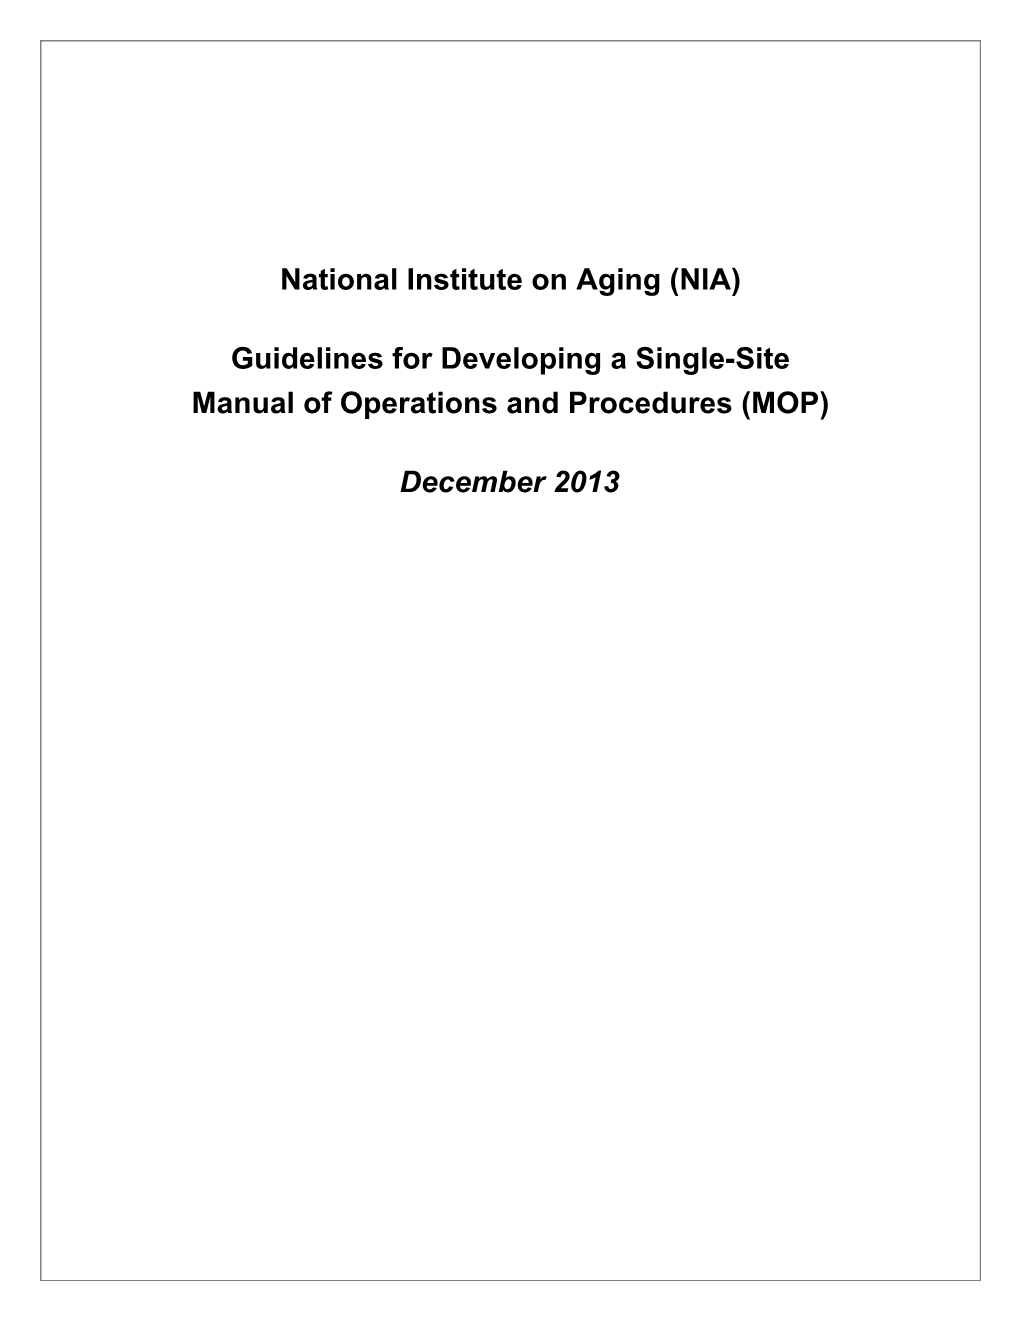 Guidelines for Developing a Single-Site, Manual of Operations and Procedures (MOP)